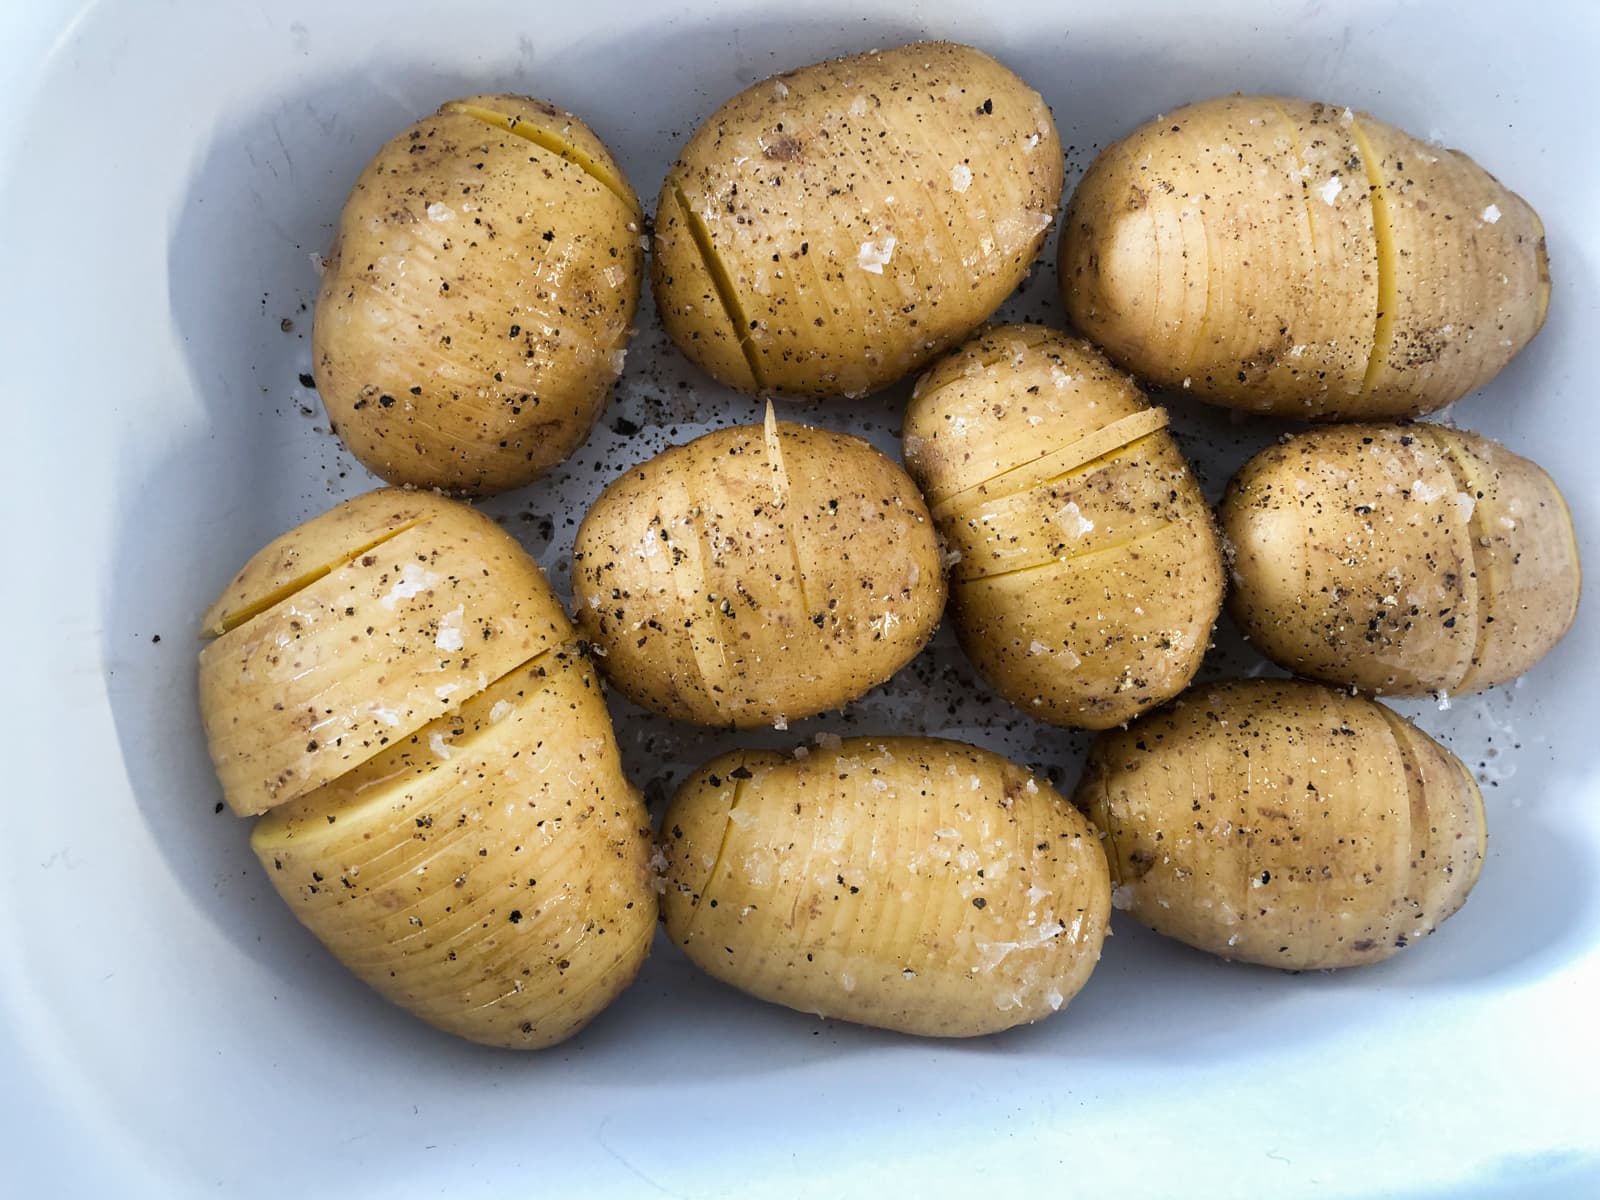 Potatoes sliced and seasoned with salt and pepper ready for the oven.